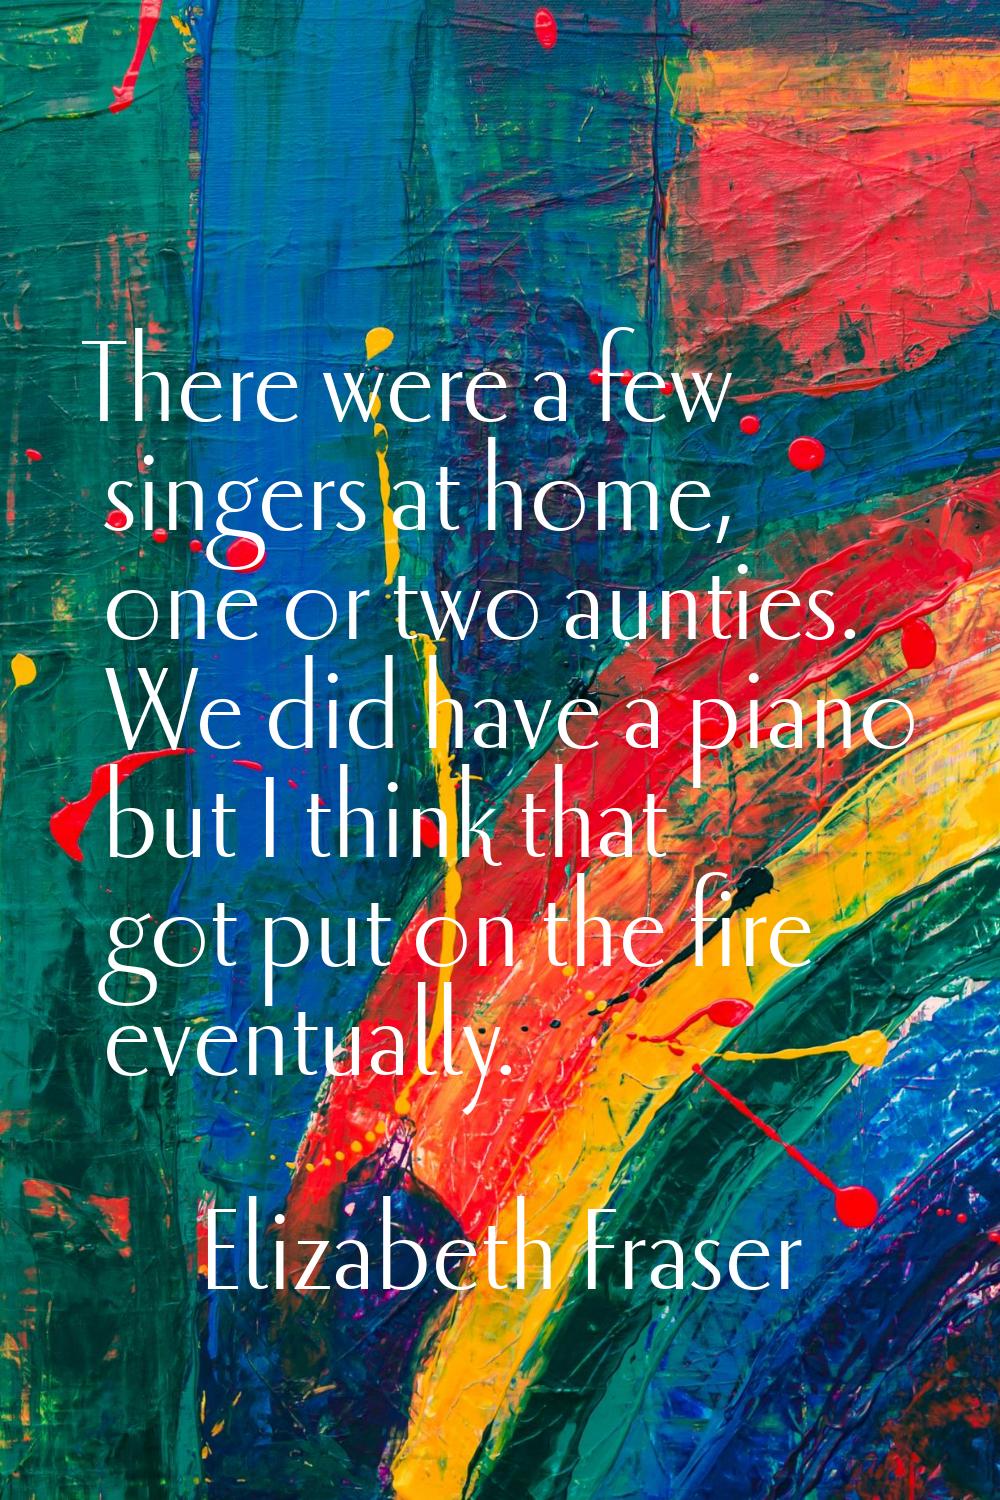 There were a few singers at home, one or two aunties. We did have a piano but I think that got put 